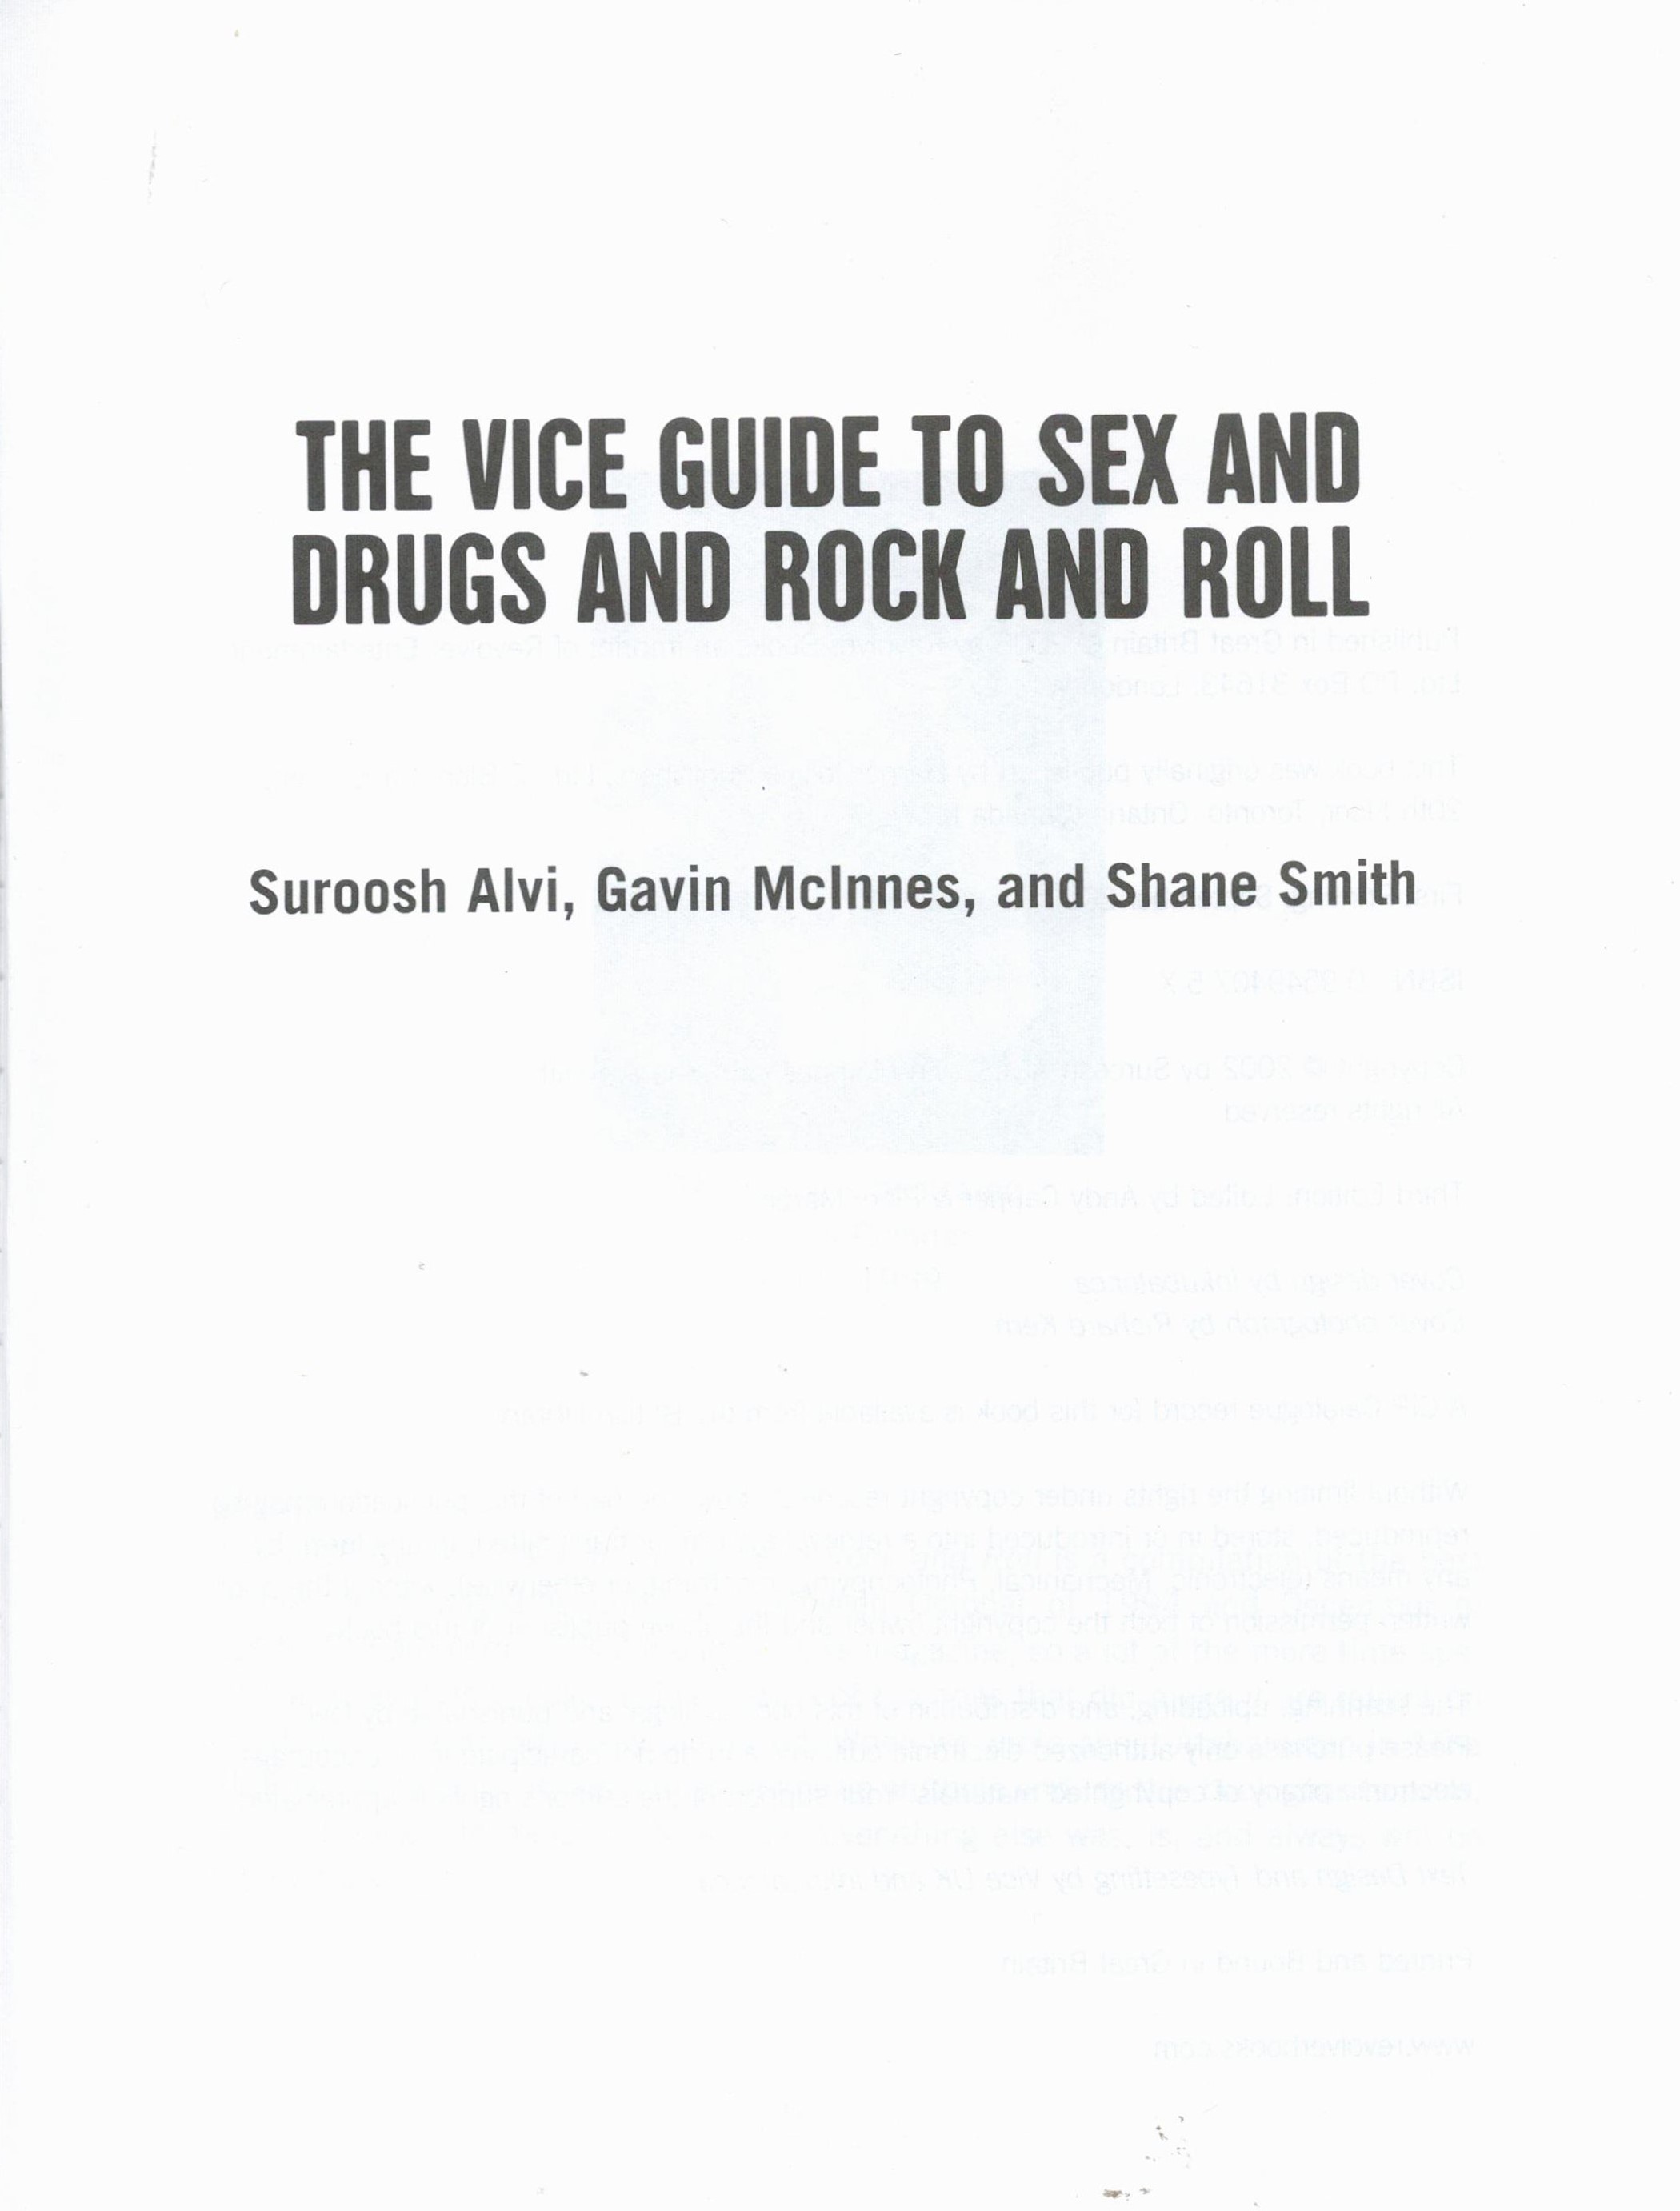 The Vice Guide to Sex and Drugs and Rock and Roll by Suroosh Alvi, Gavin McInnes, and Shane Smith - Image 3 of 4